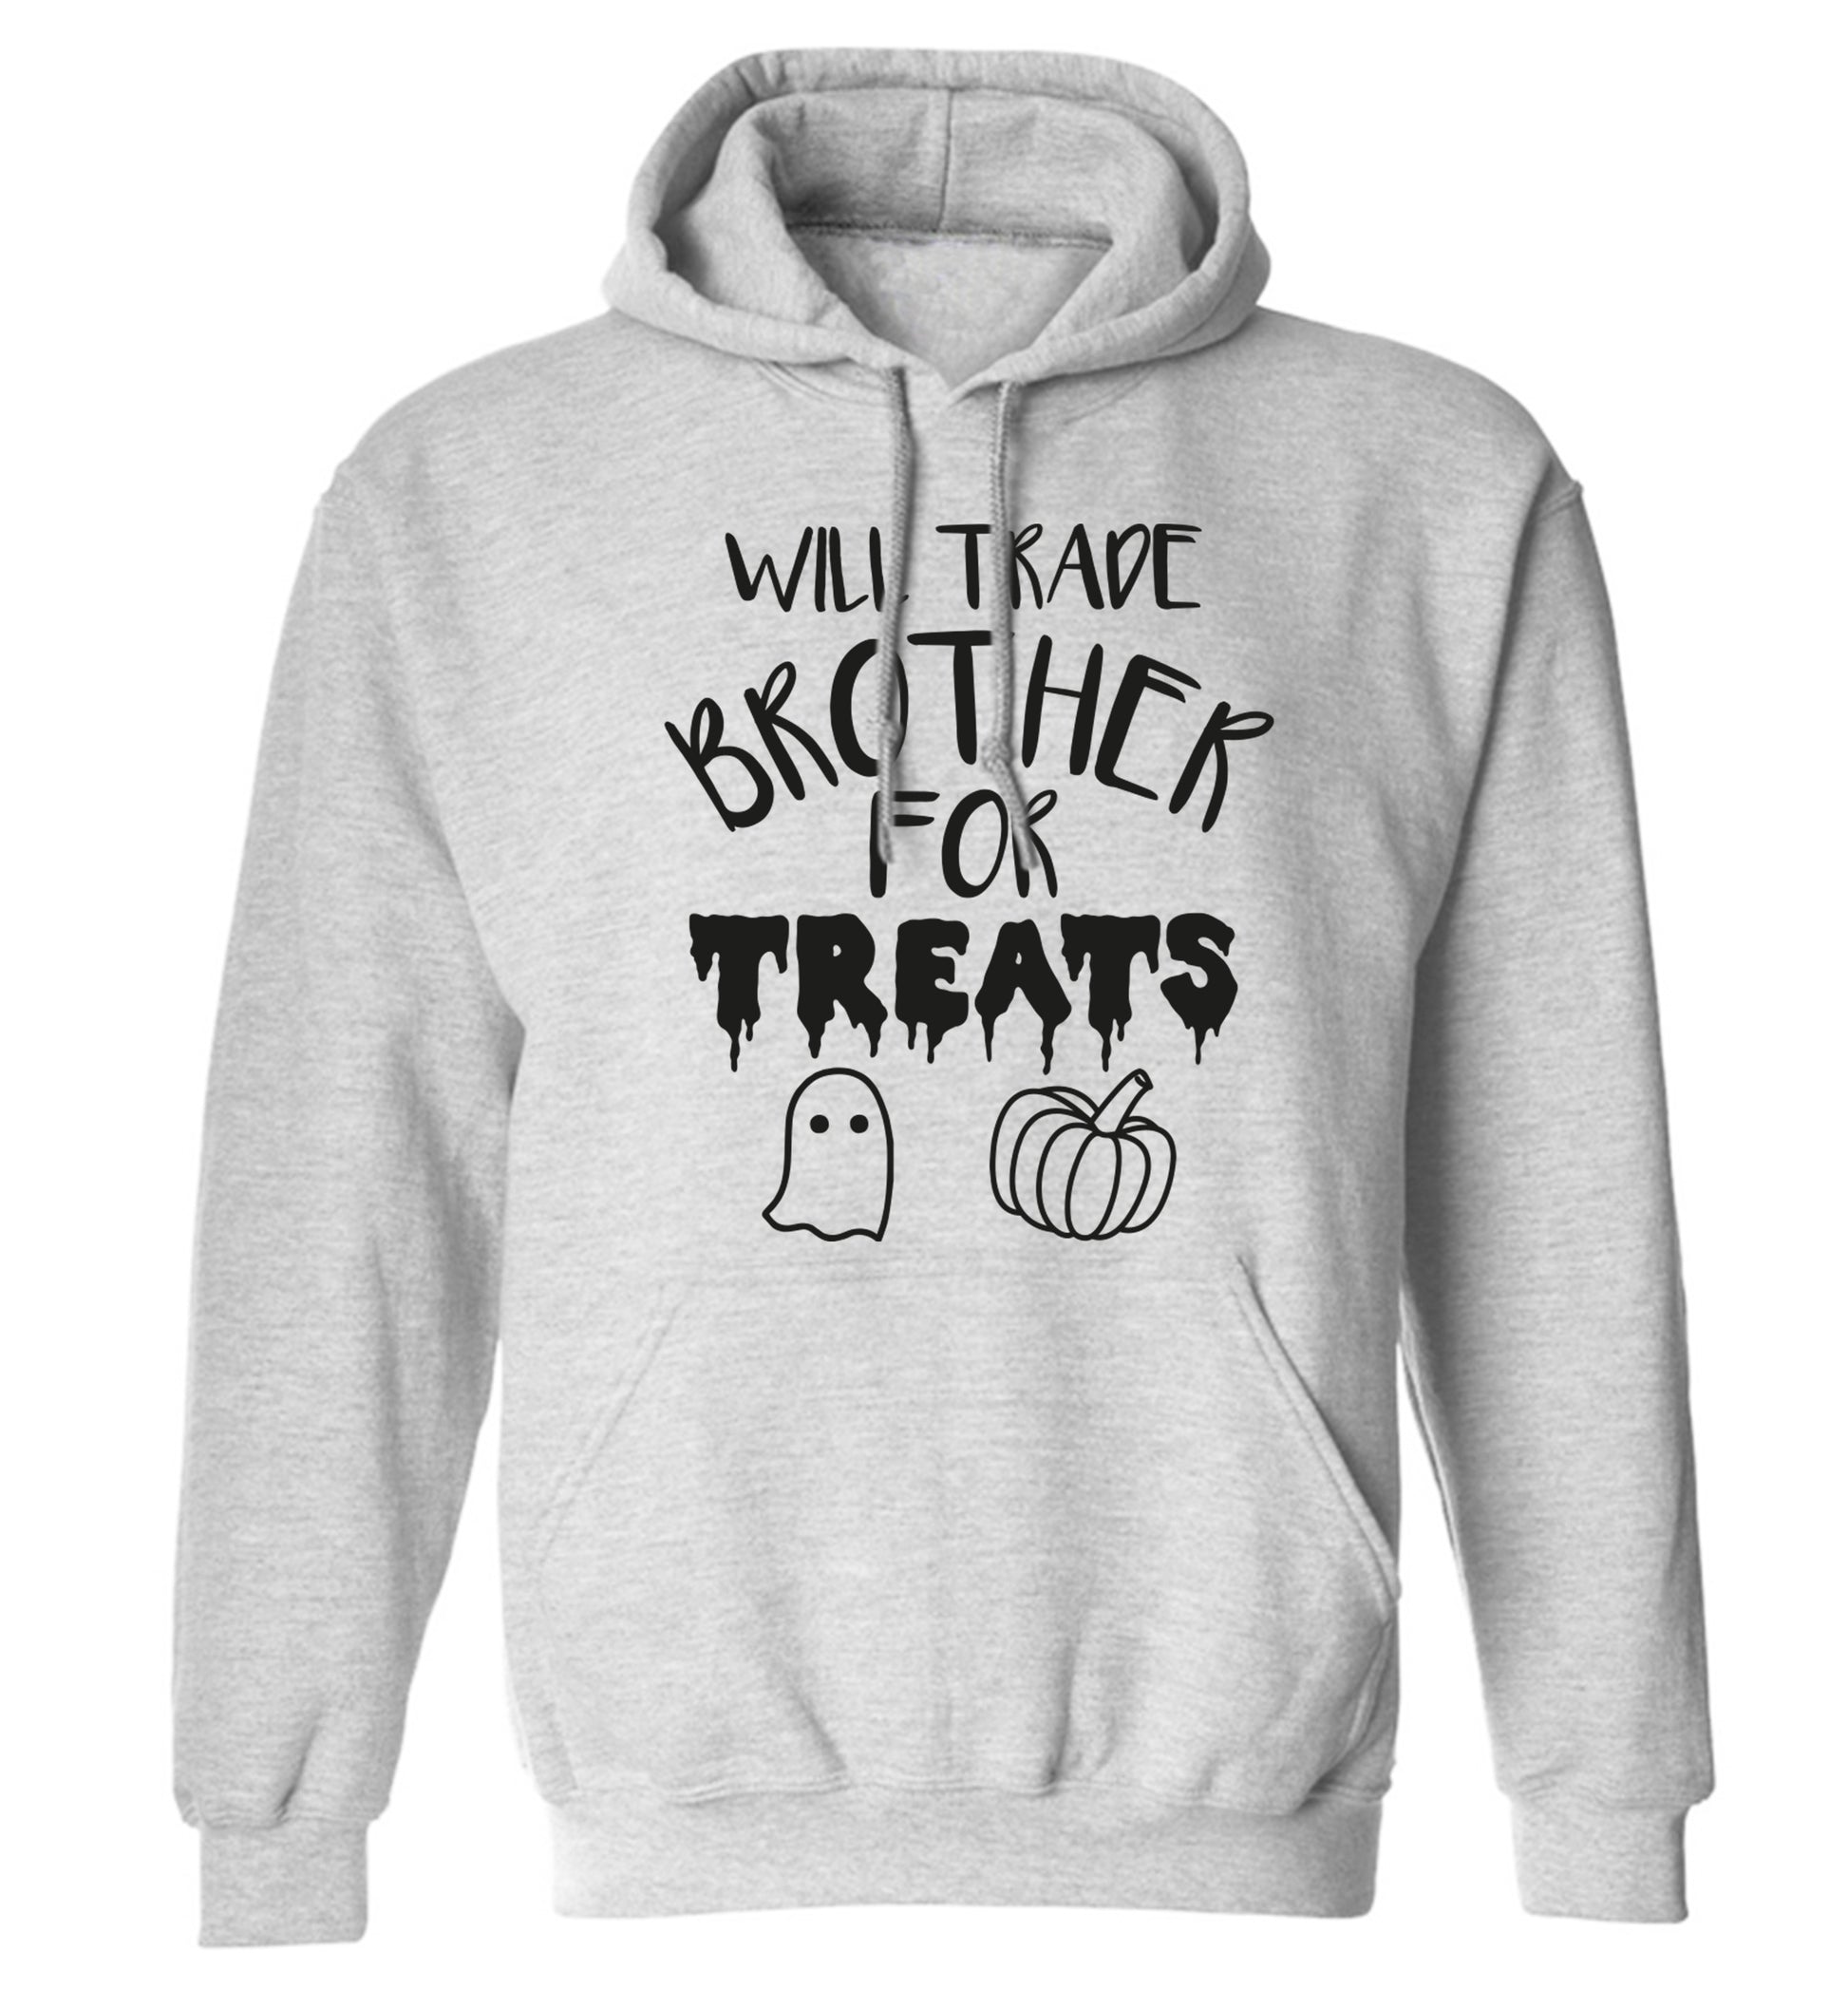 Will trade brother for treats adults unisex grey hoodie 2XL